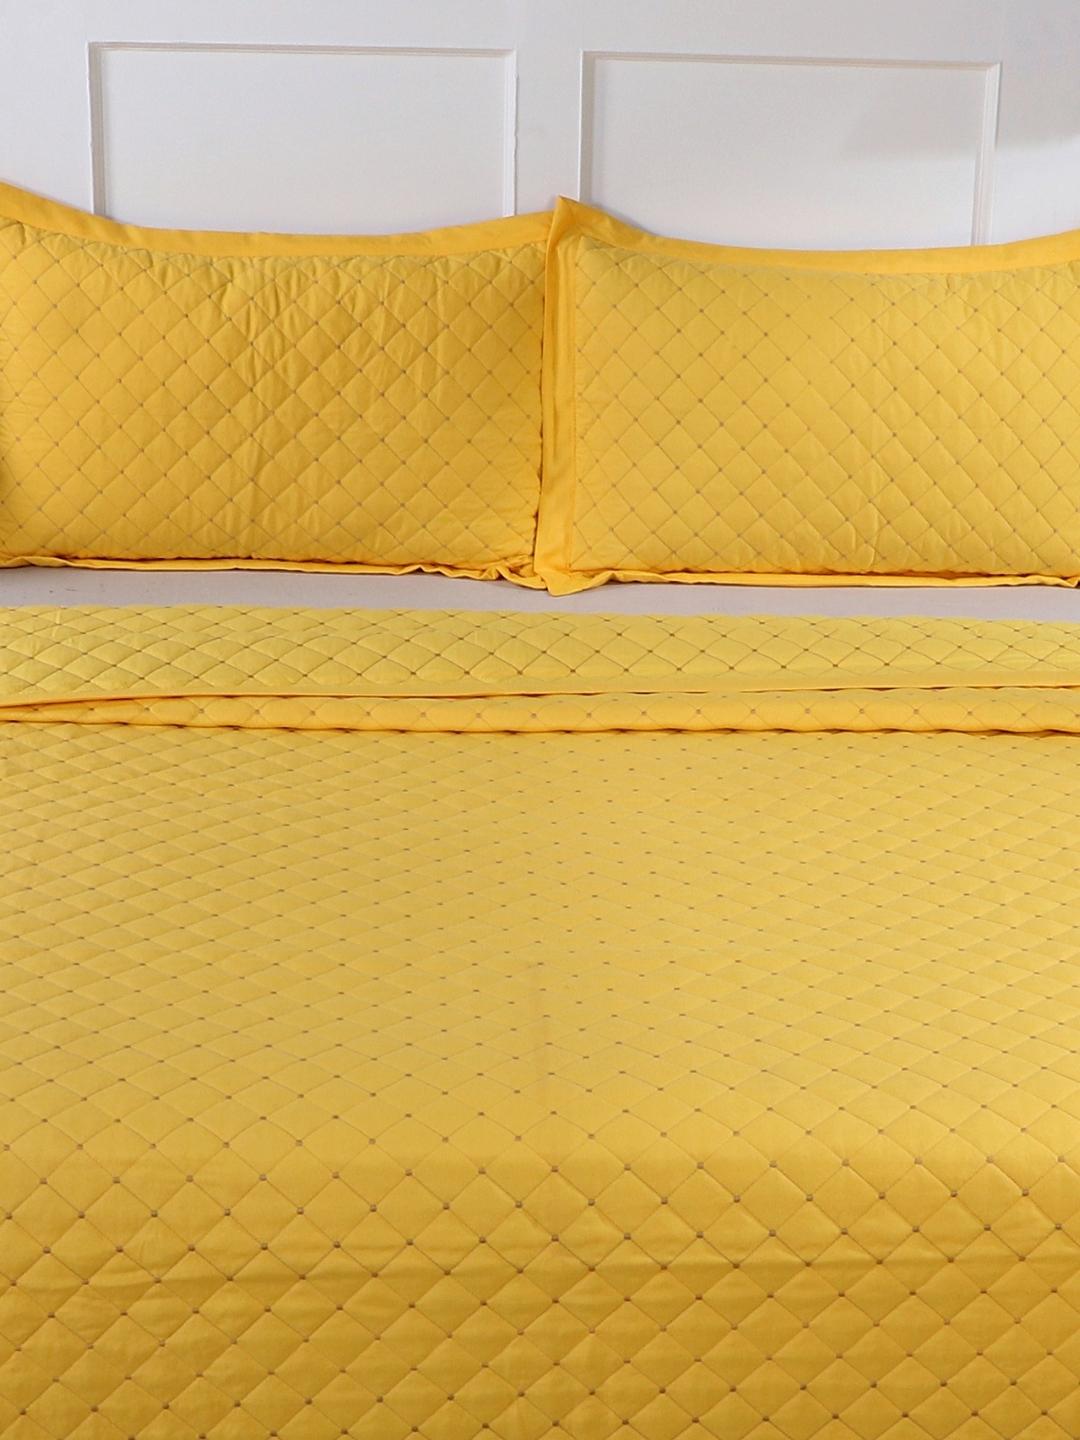 Double Bed Embroidered and Quilted Bedcover Set-Mustard Yellow